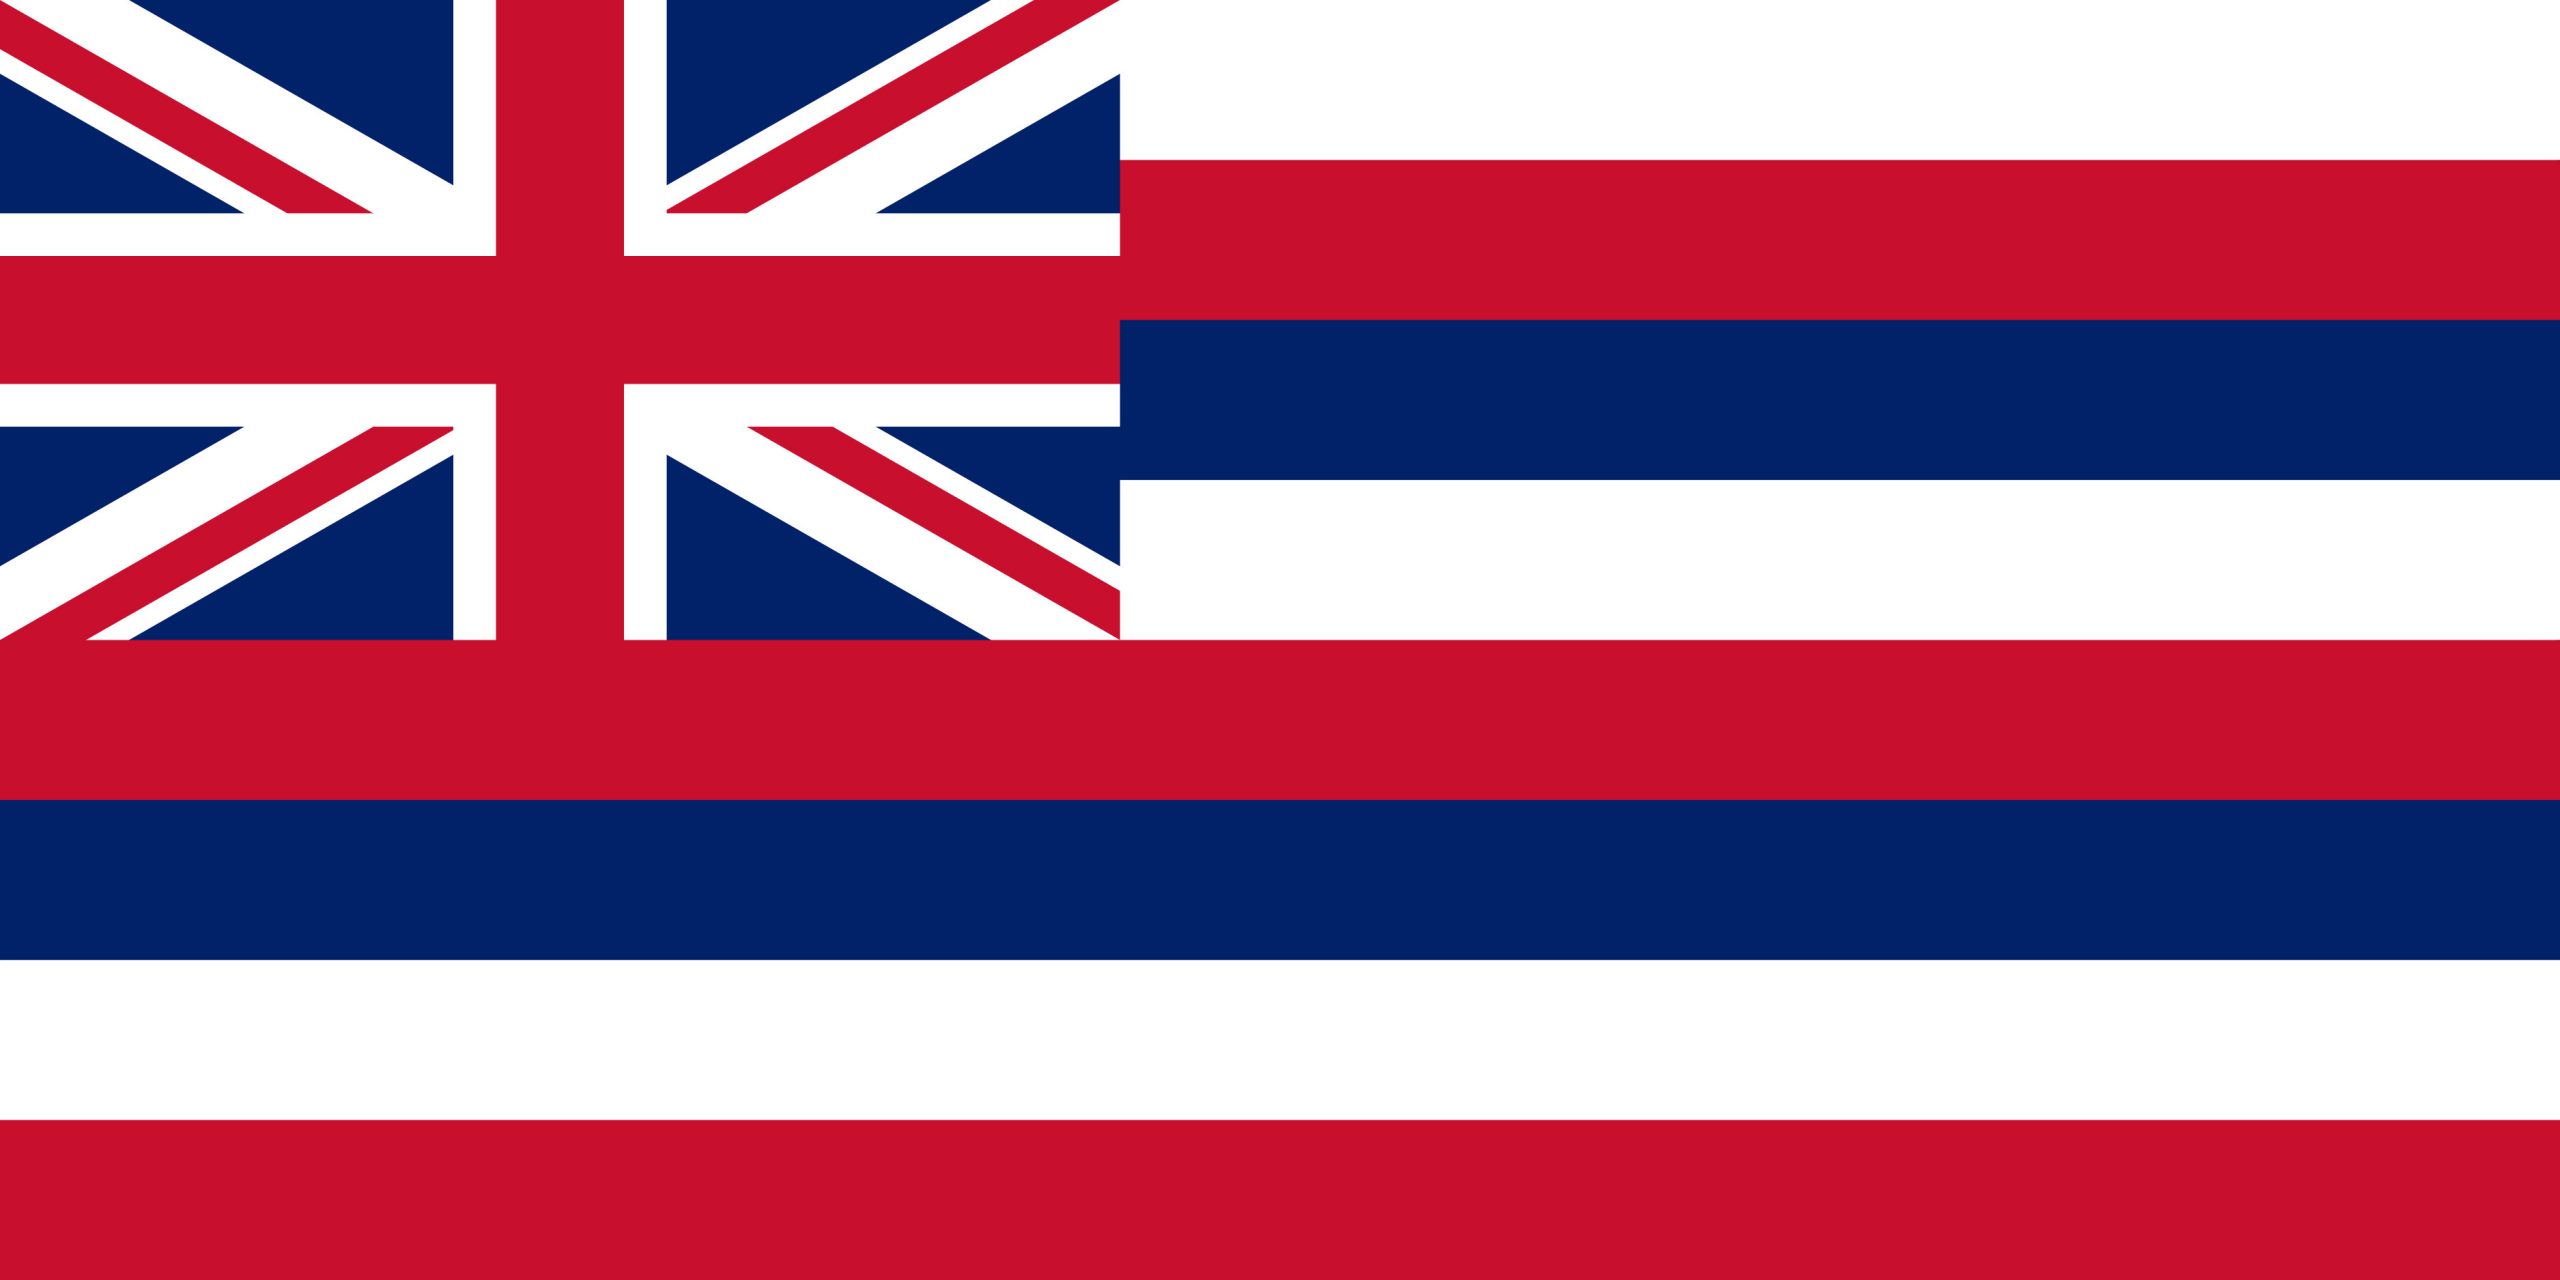 Hawaii State Flag Colors – HTML HEX, RGB, HSL, CMYK, HWB and NCOL